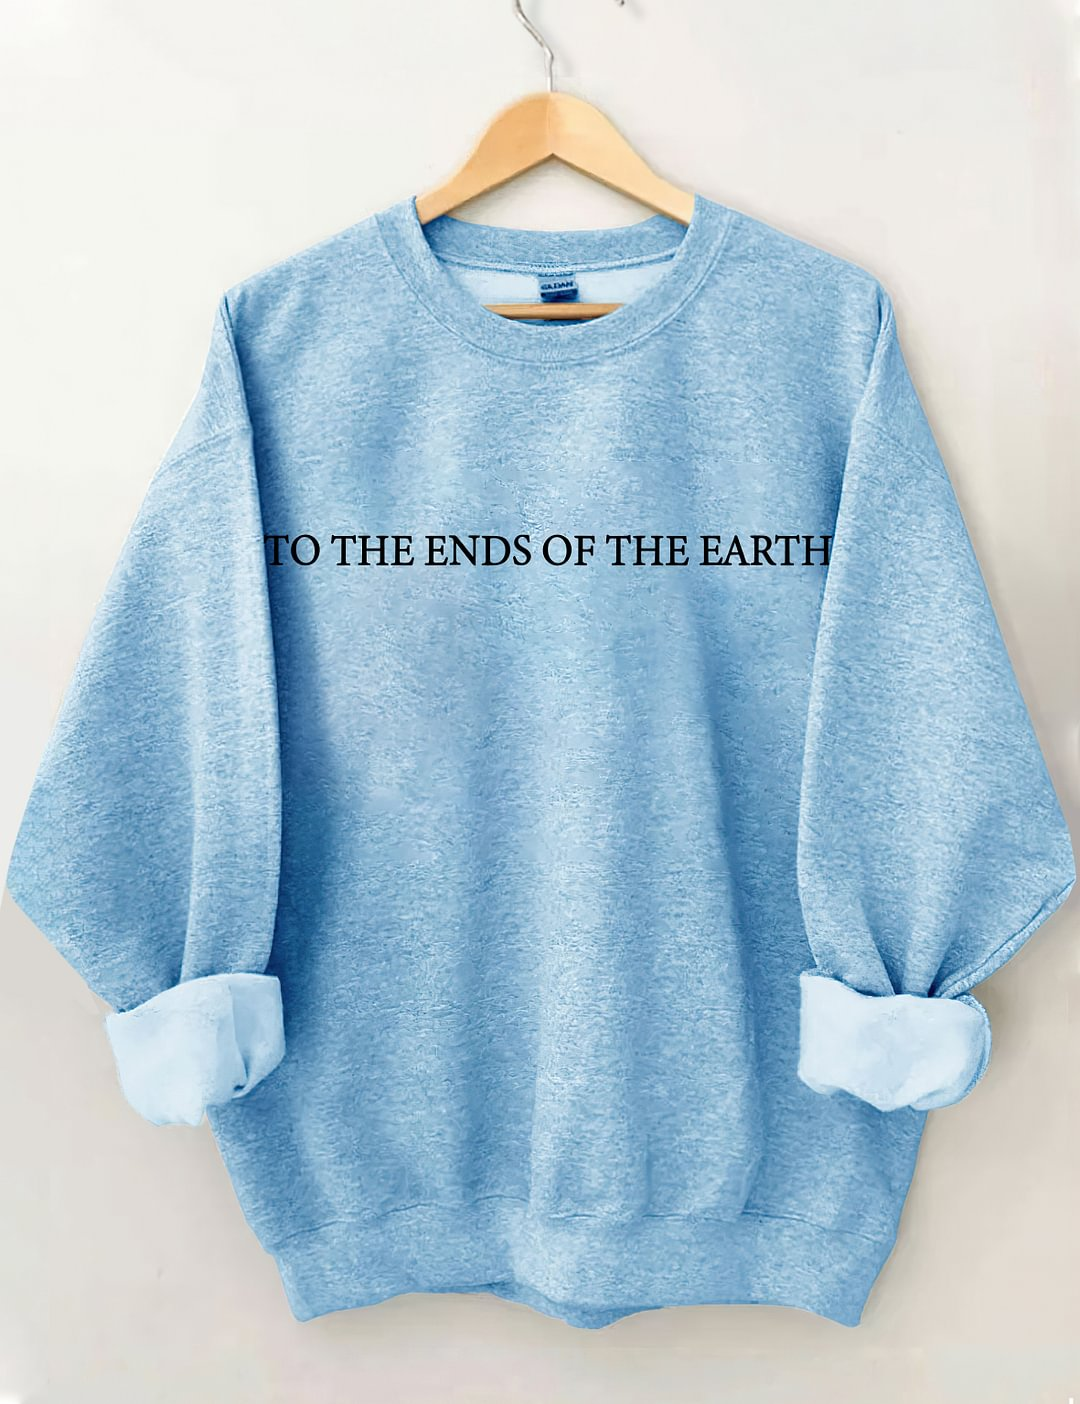 To The Ends Of The Earth Sweatshirt